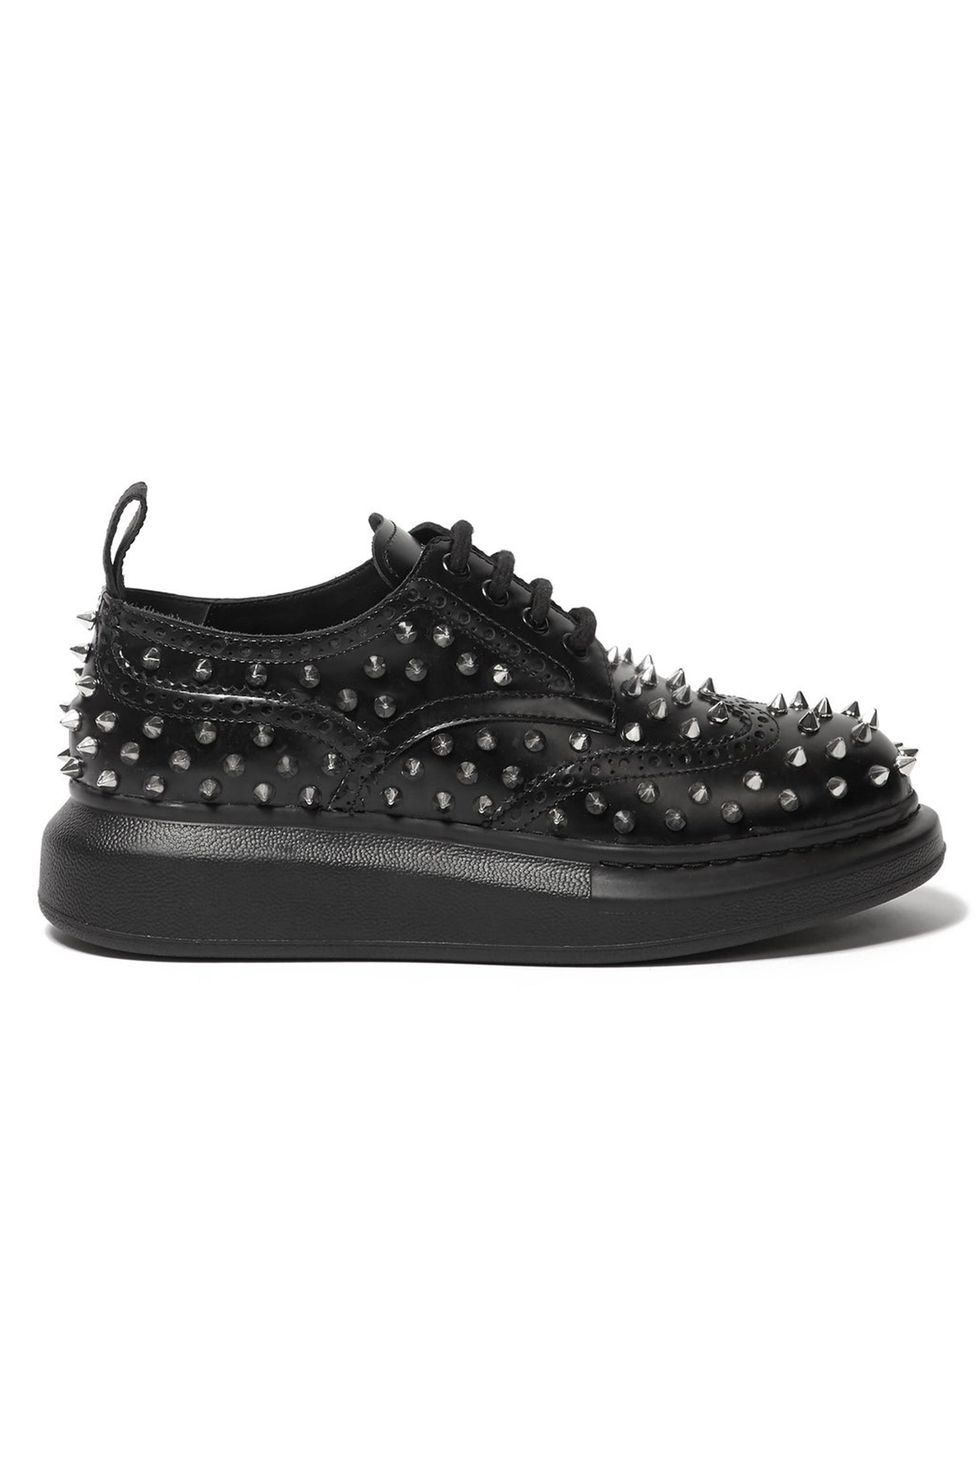 12 Pairs of Goth Shoes That Even Non-Goths Can Wear